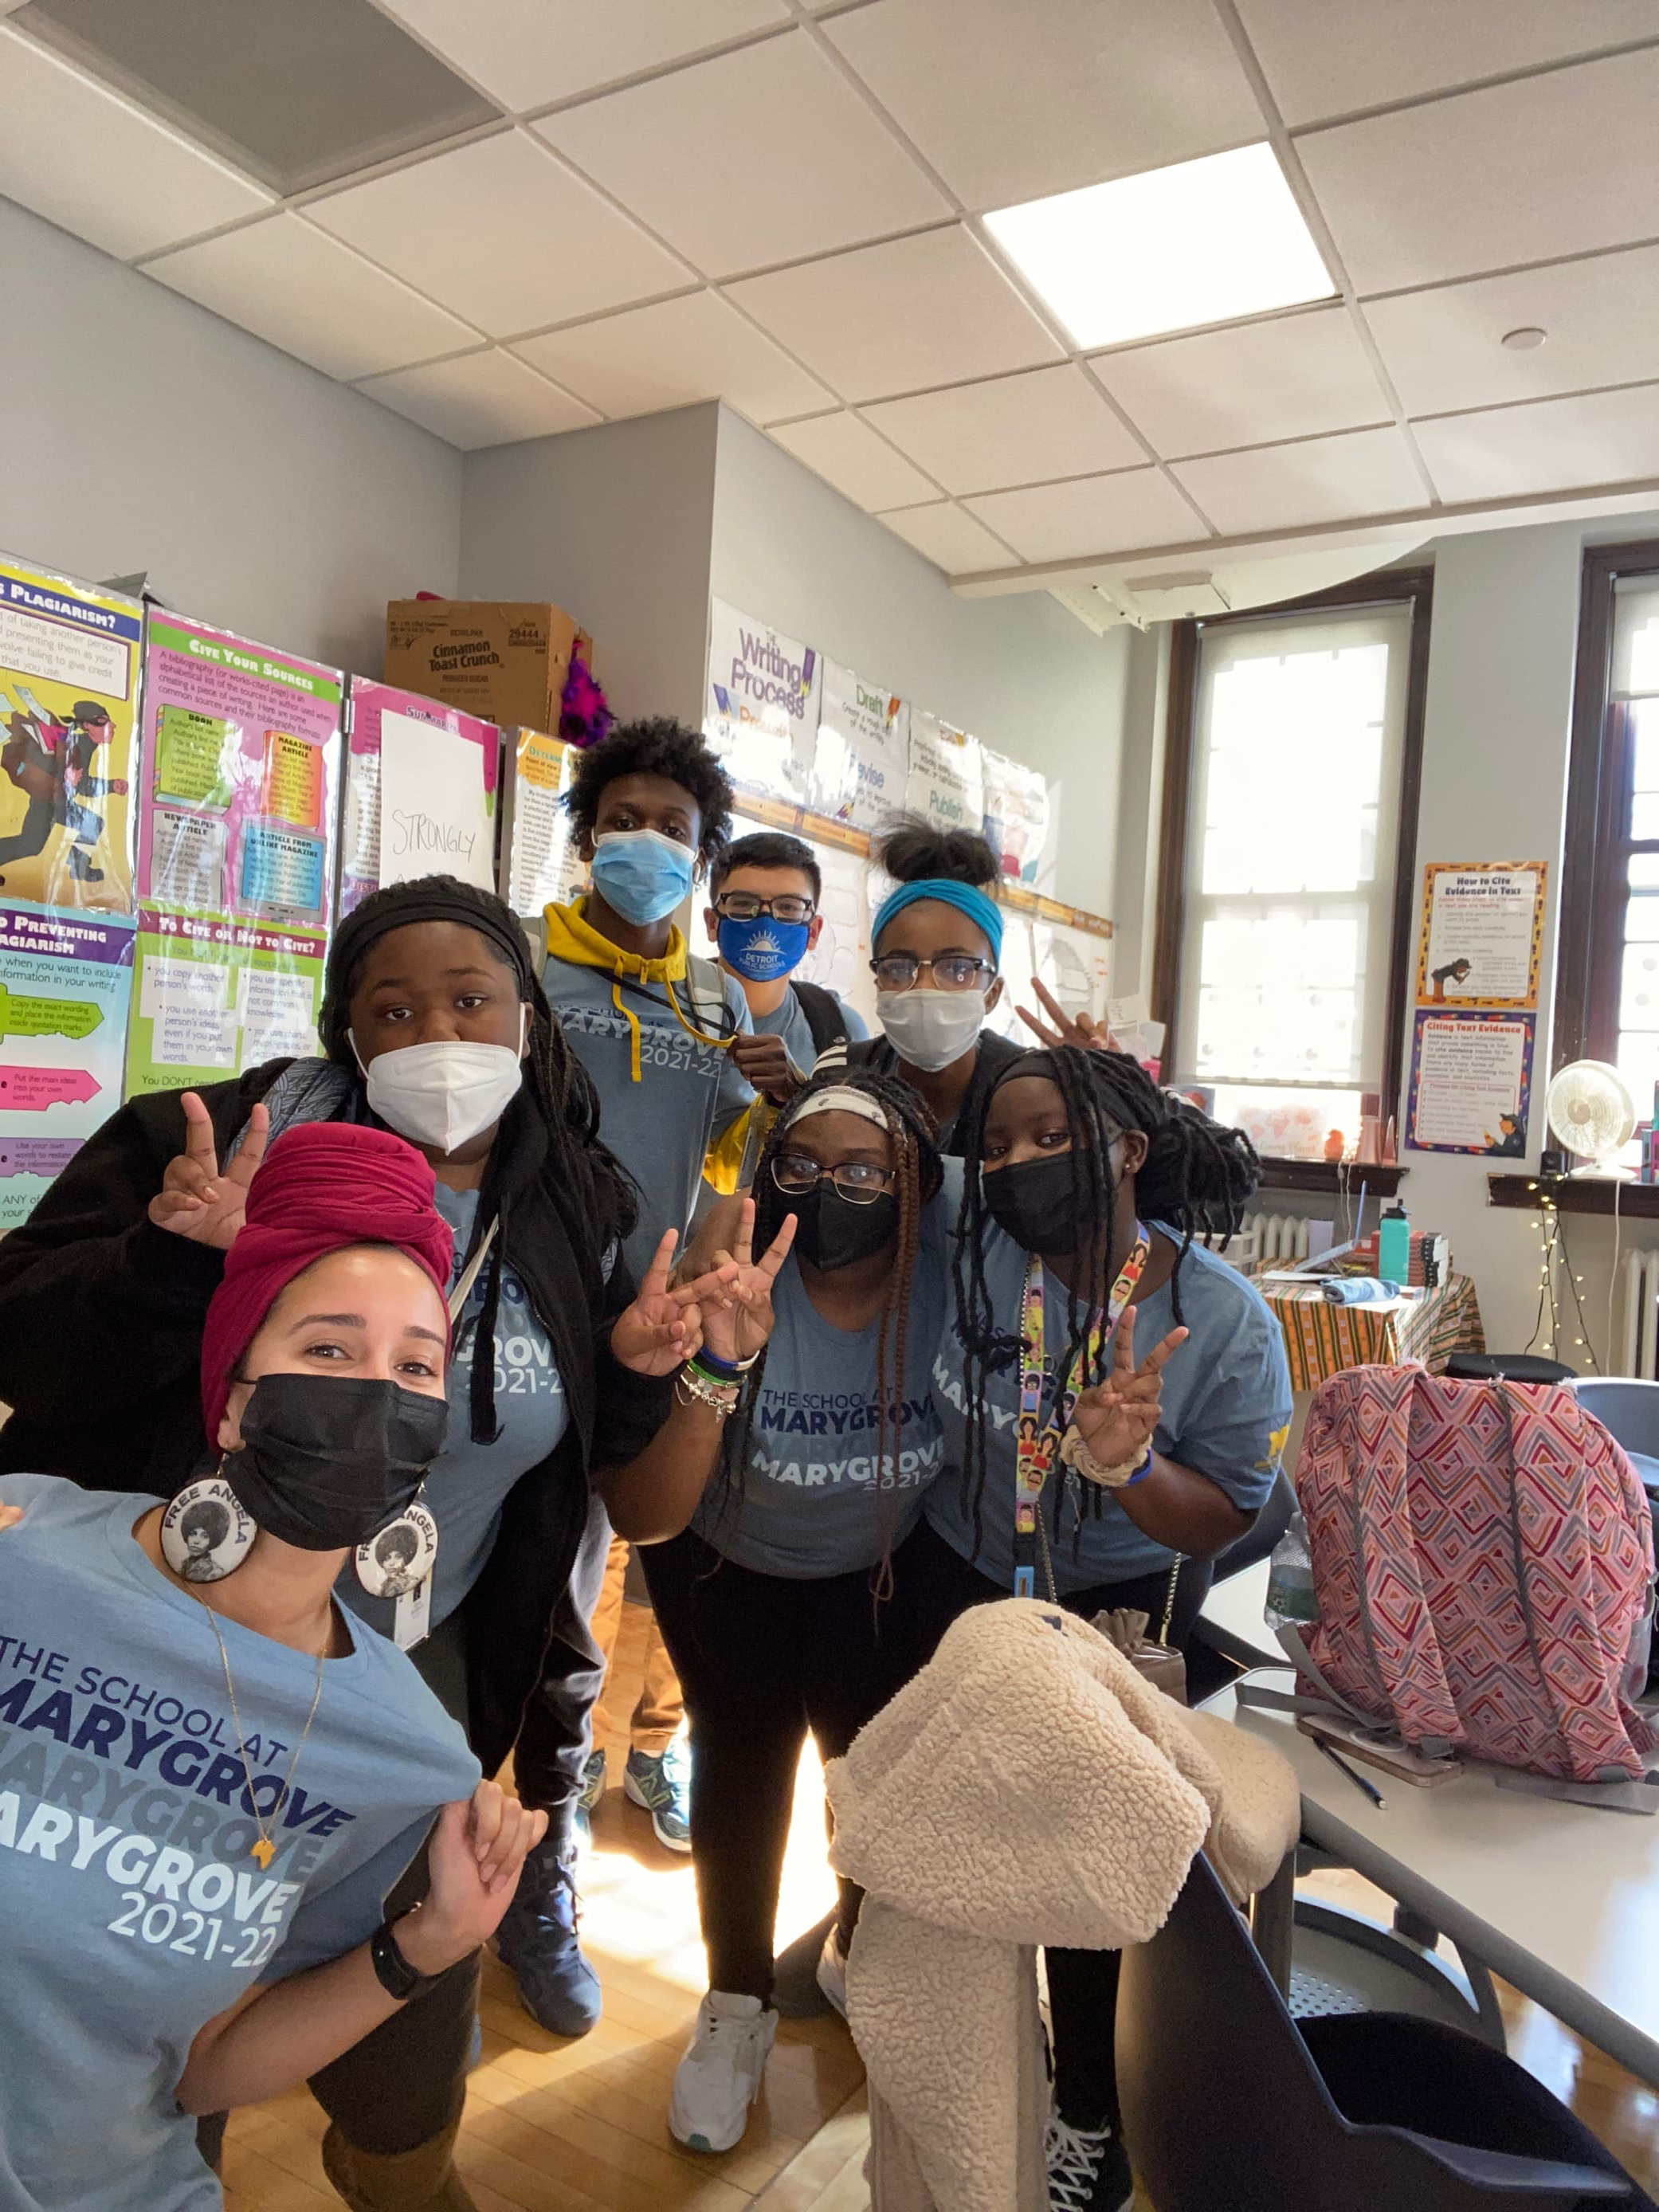 Several masked students, faculty, and staff, wearing Marygrove shirts and throwing peace signs, pose for a photo in a classroom.